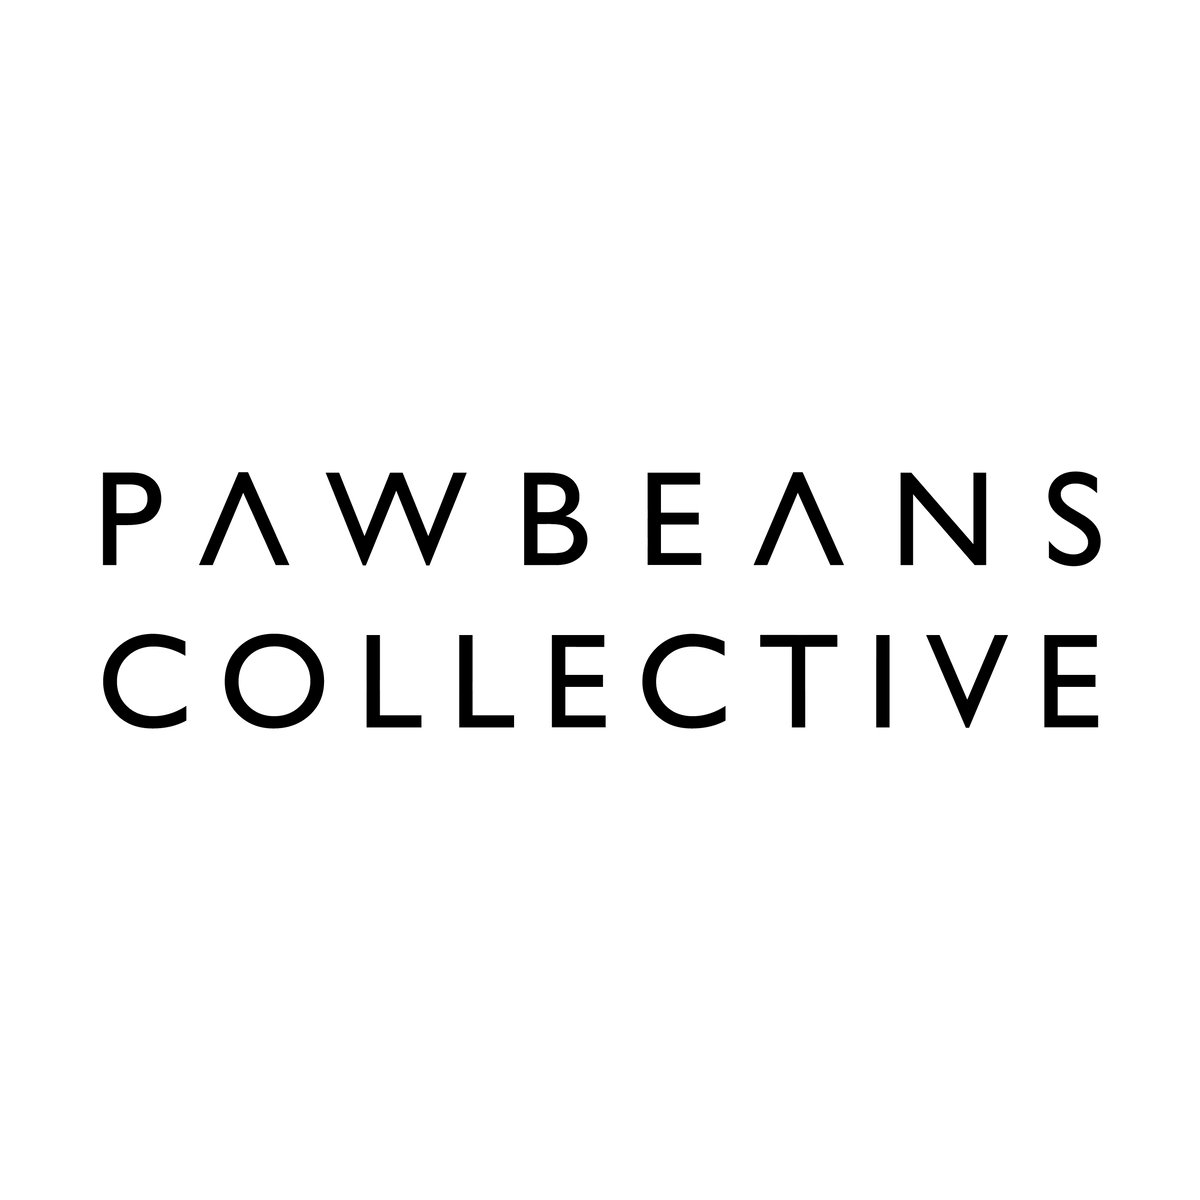 Pawbeans Collective